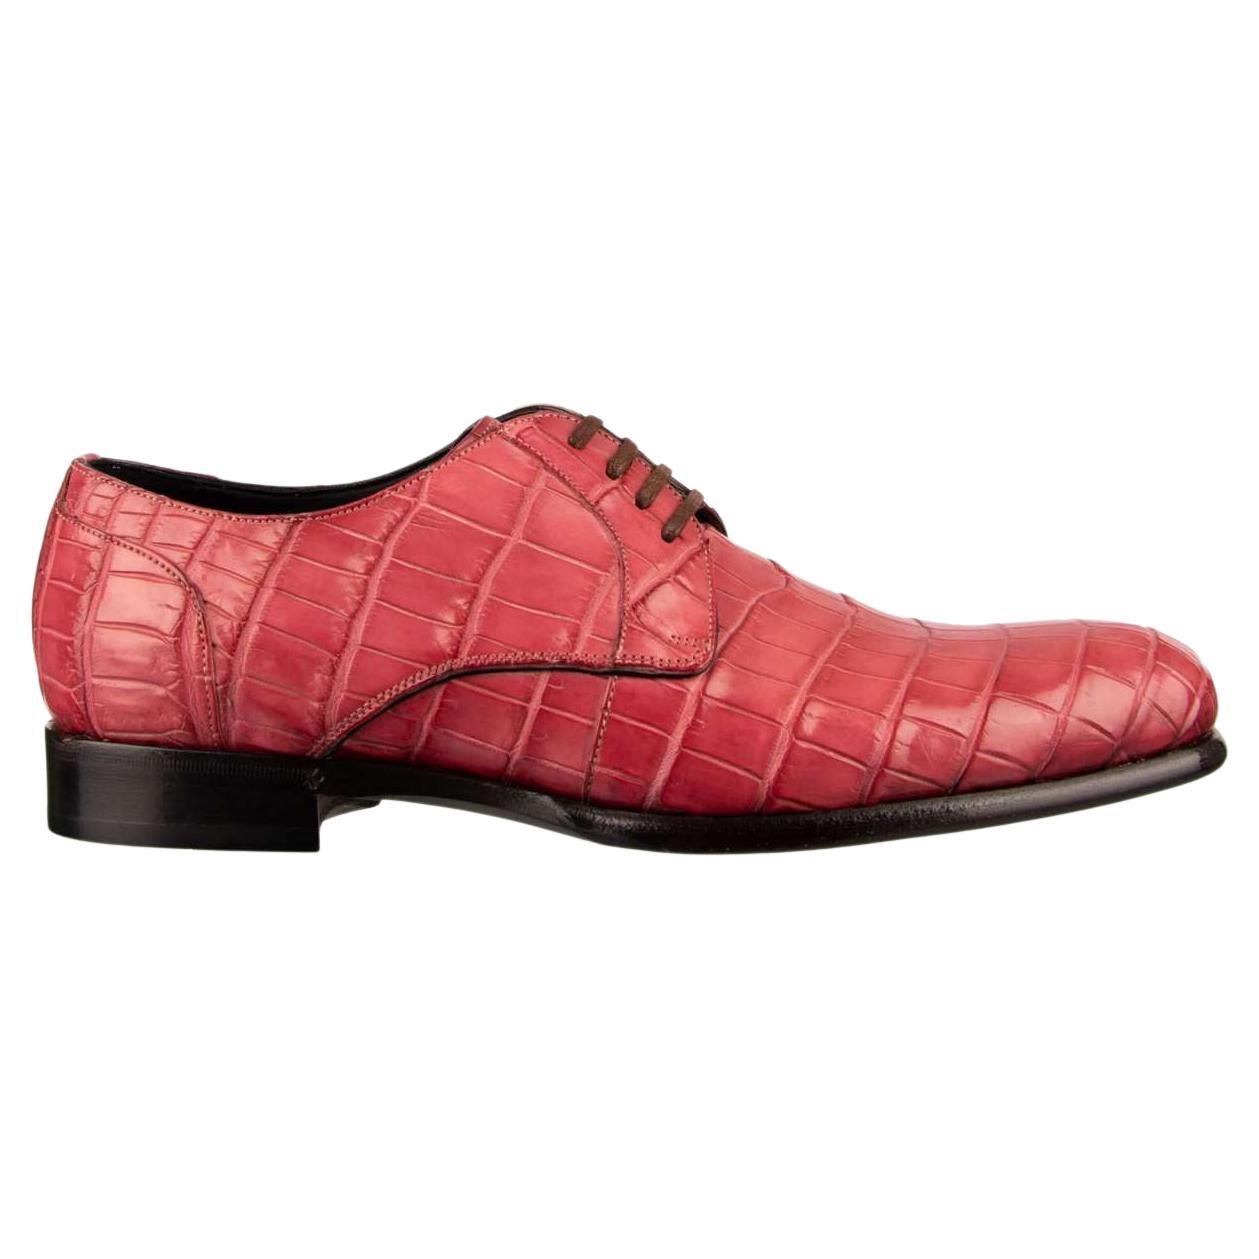 Dolce & Gabbana Crocodile Leather Derby Shoes SIENA Pink EUR 39 For Sale